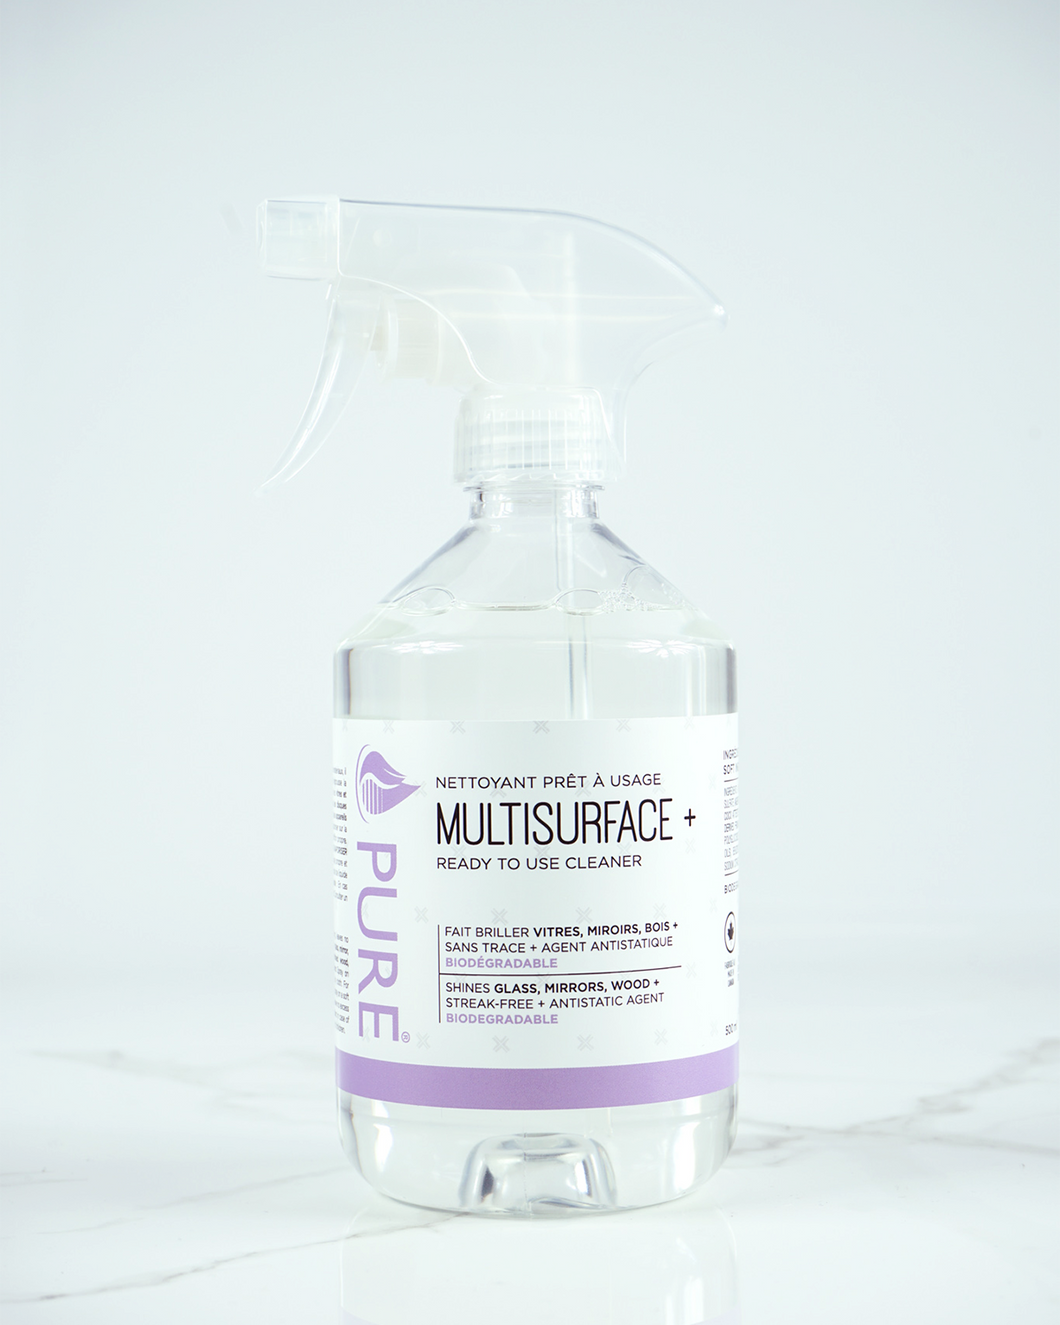 PURE Multisurface+ Cleaner